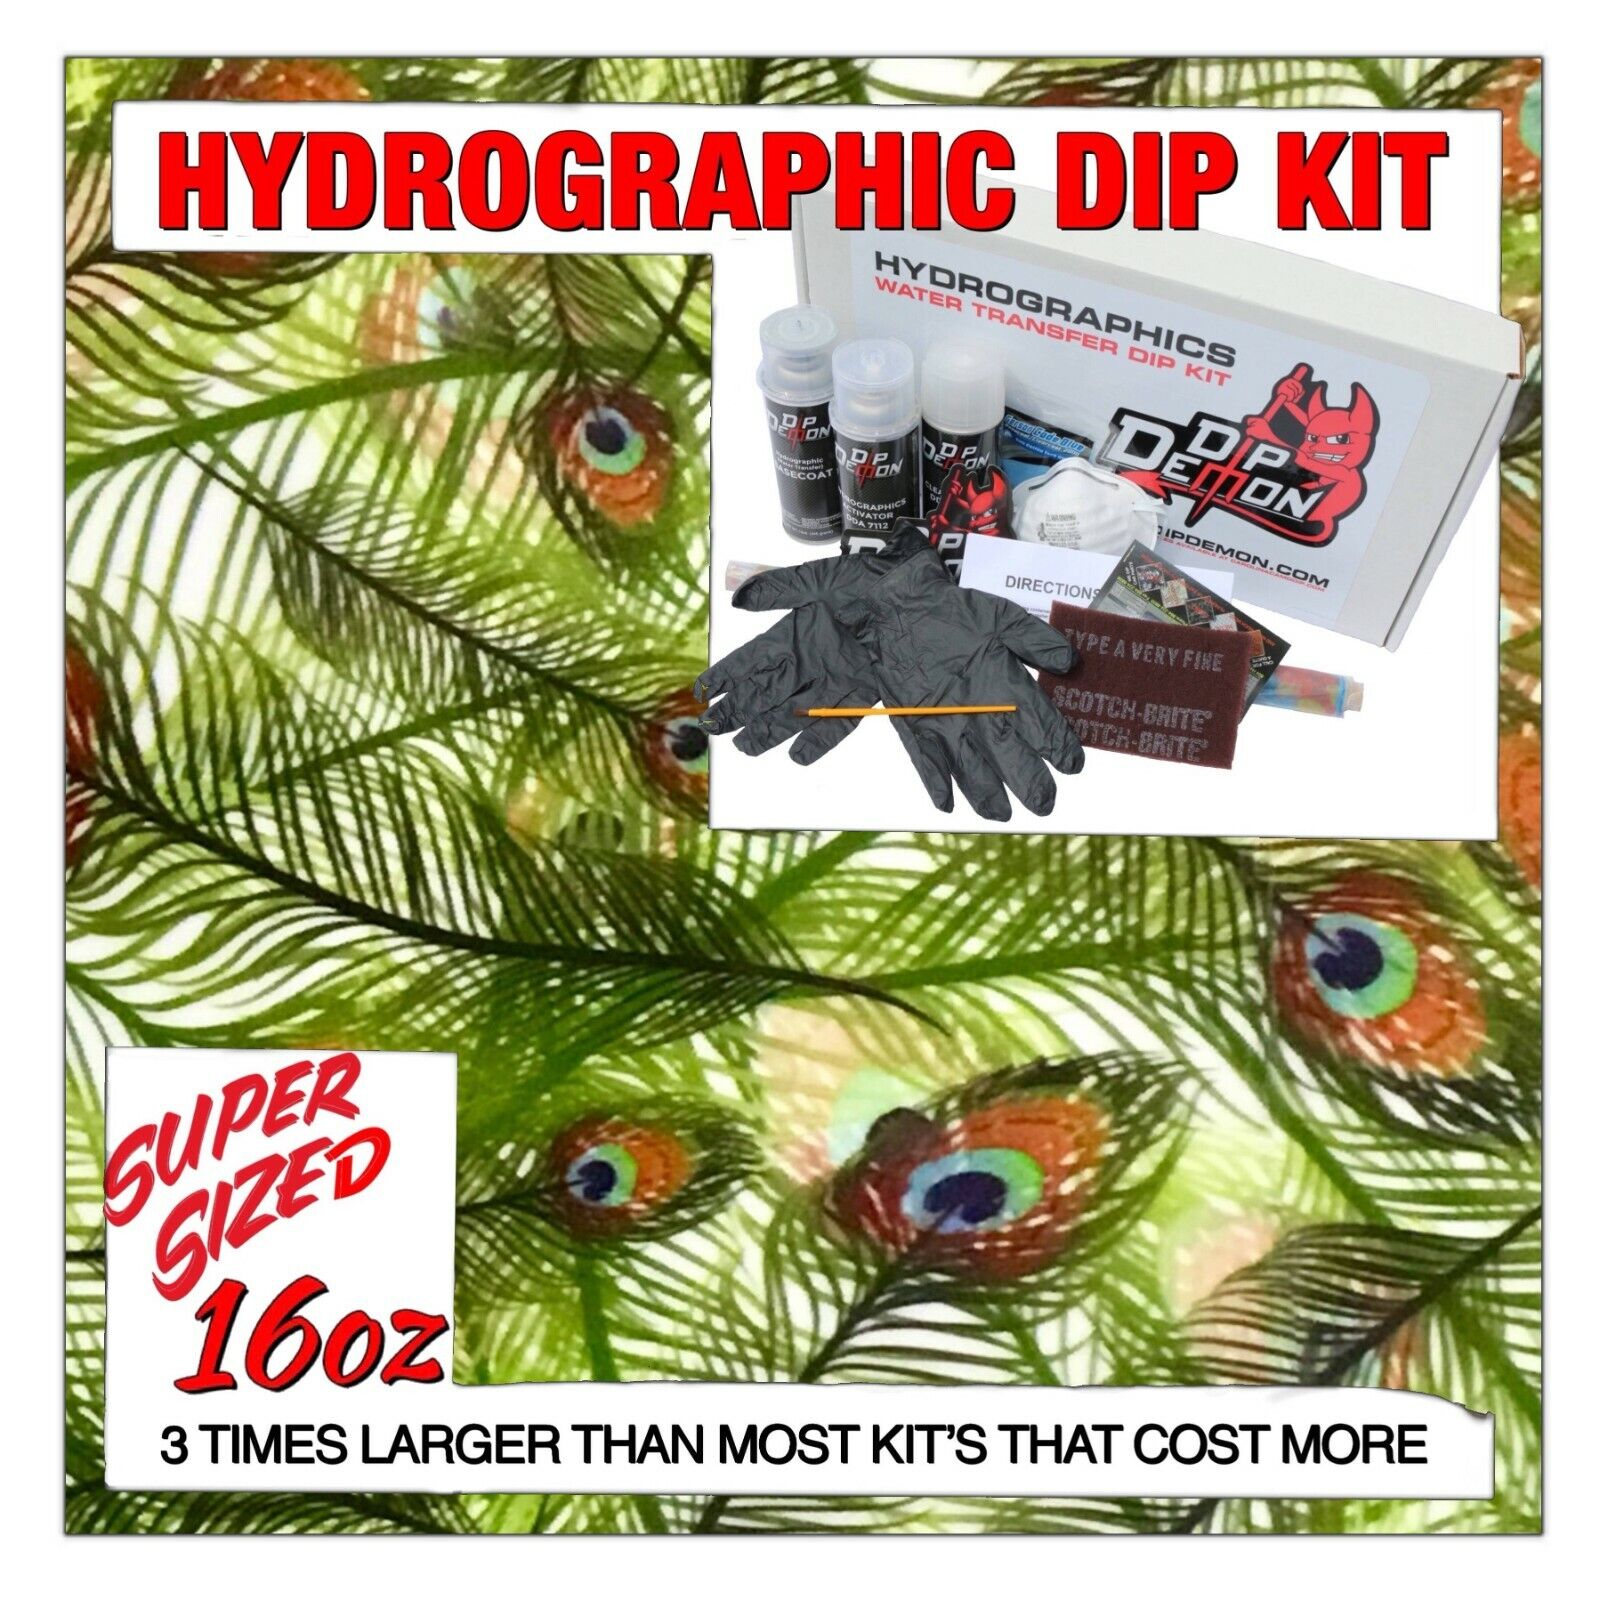 Hydrographic dip kit Mini Peacock Feathers hydro dip dipping 16o